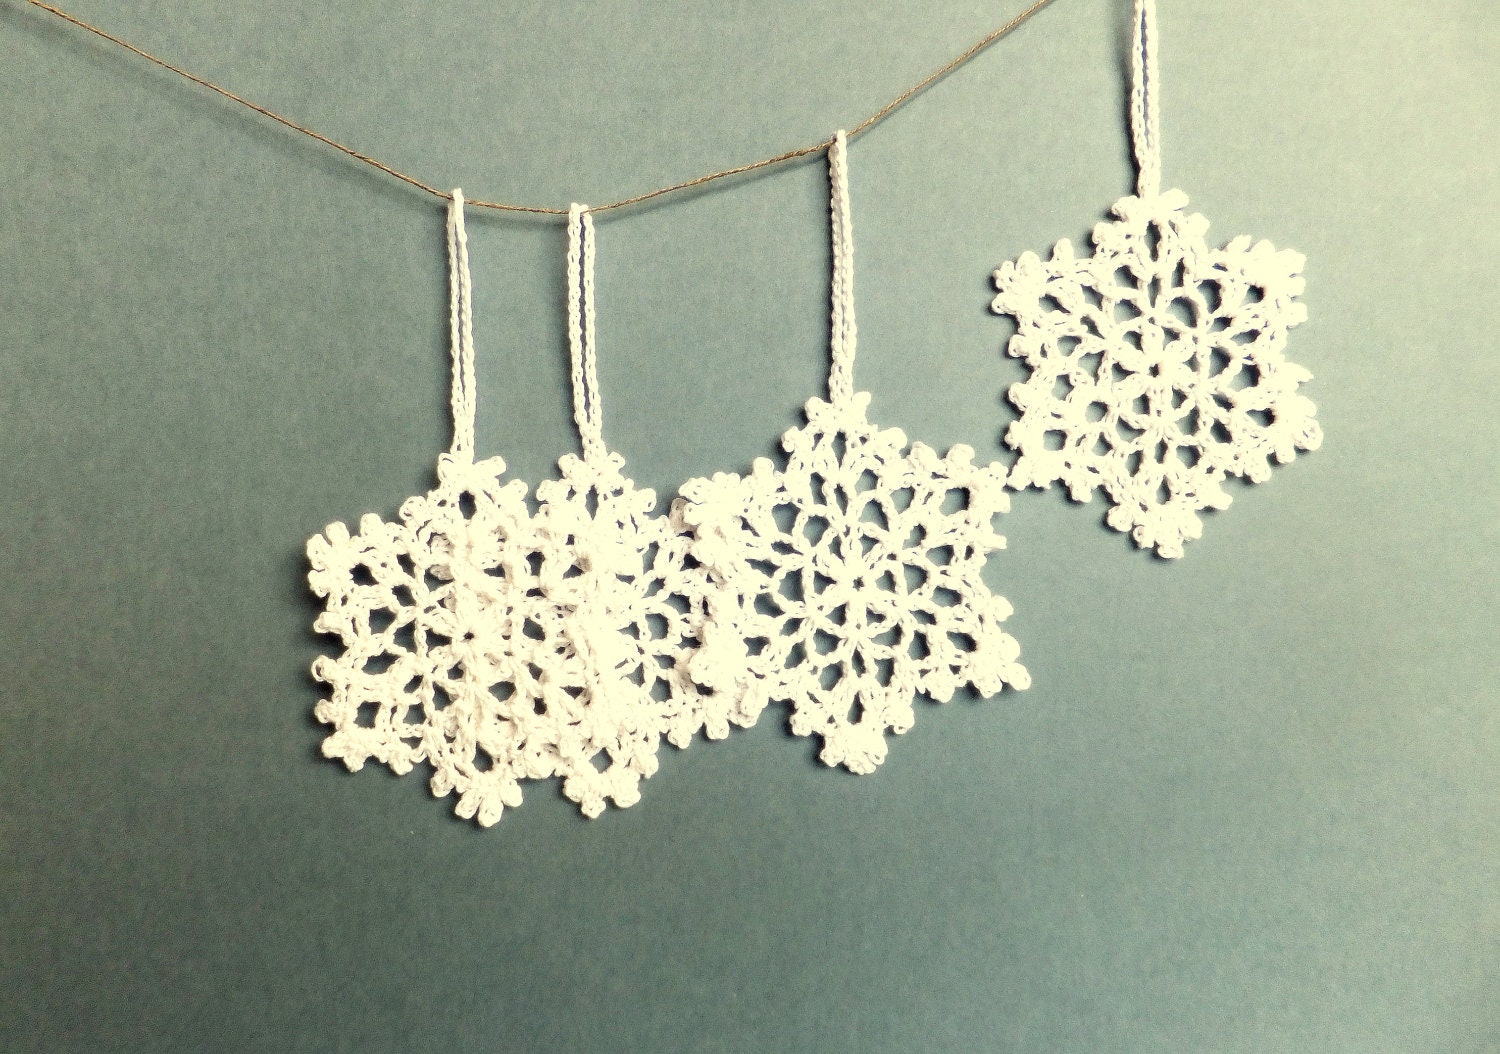 Crocheted snowflakes, Christmas tree decorations with hanging loop, white handmade holiday ornaments /set of 6/ - eljuks